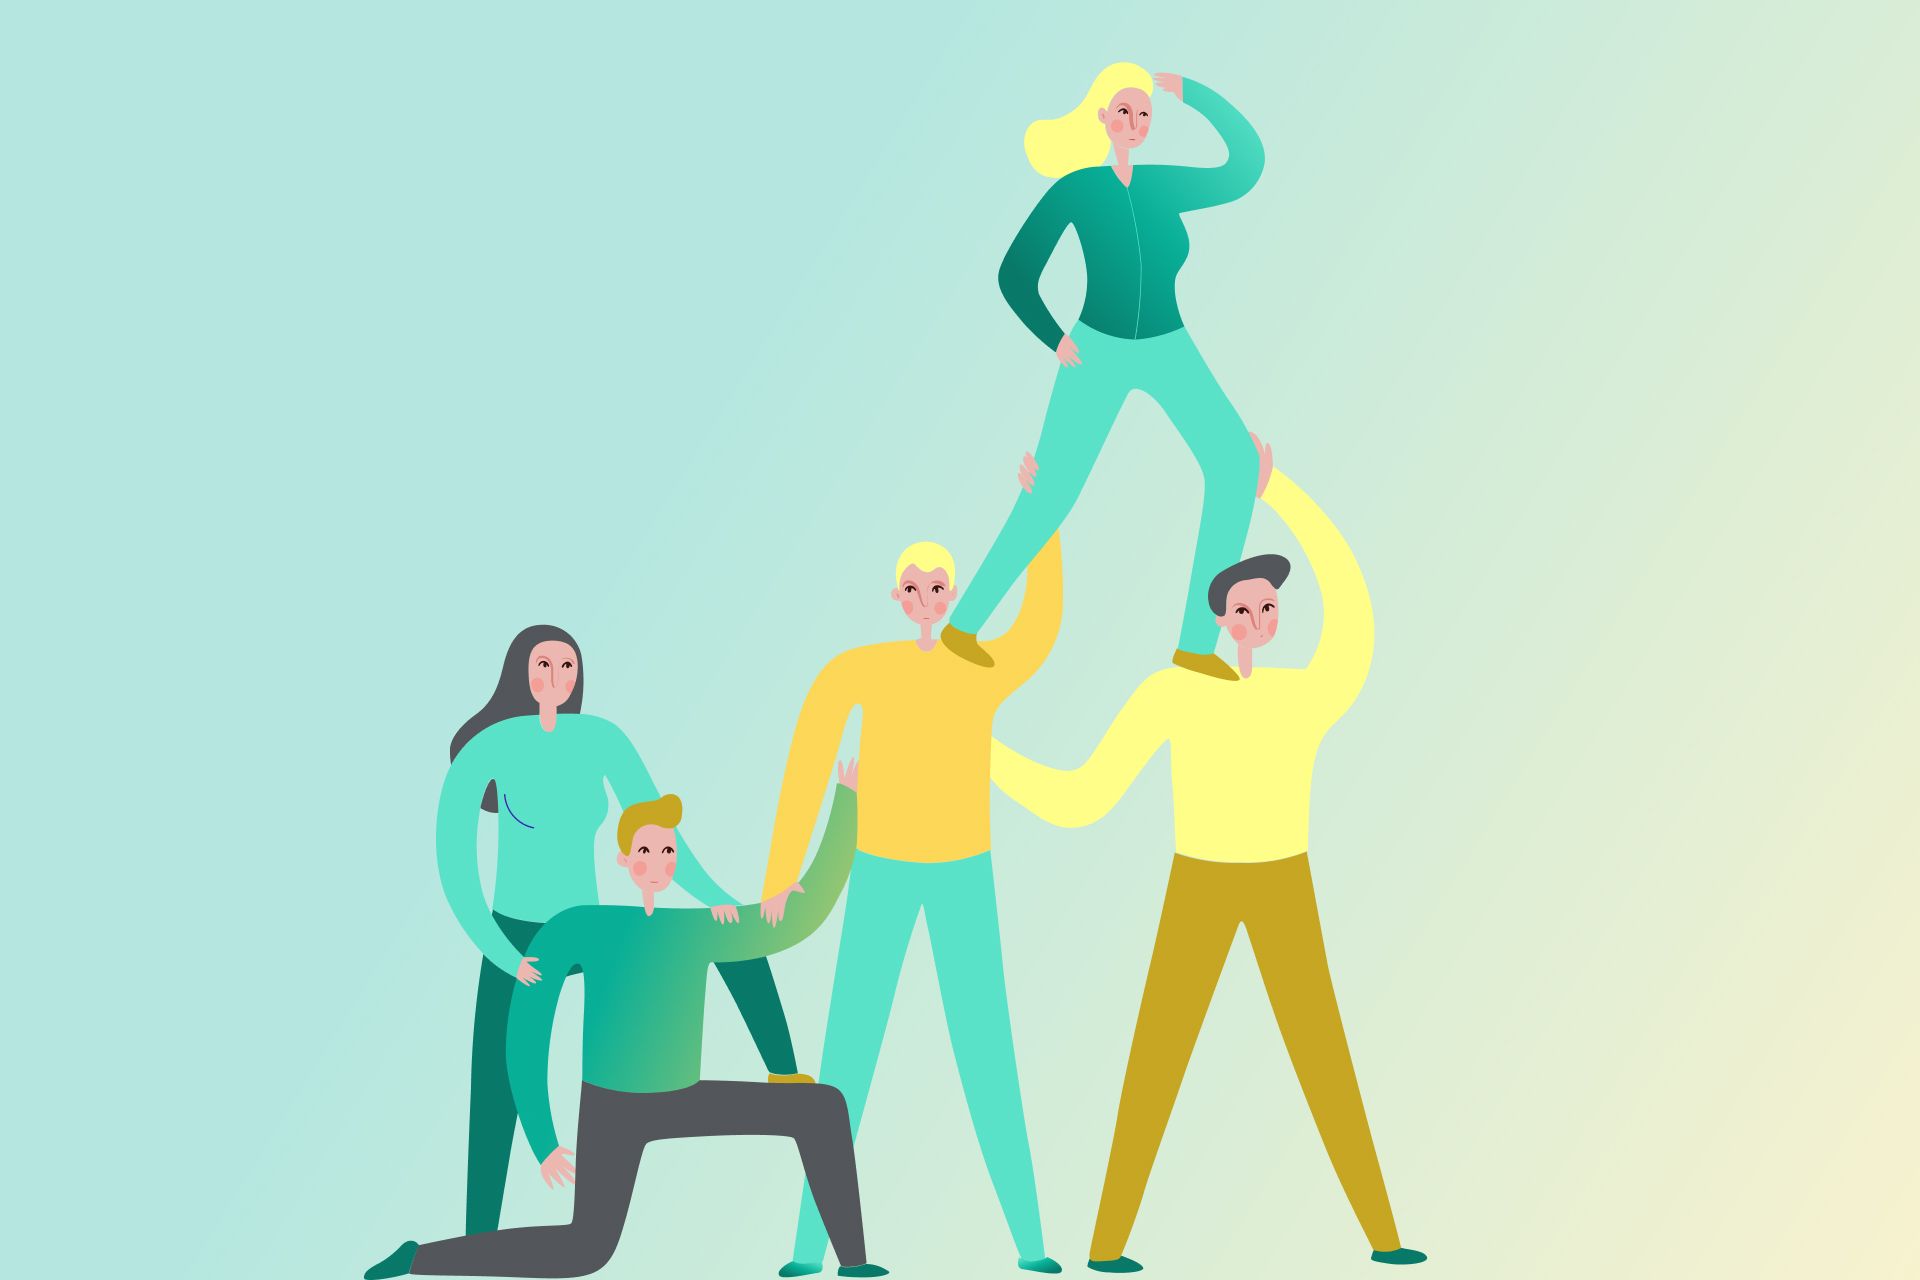 An infographic image of 5 people 2 persons holding 1 person on their sholder